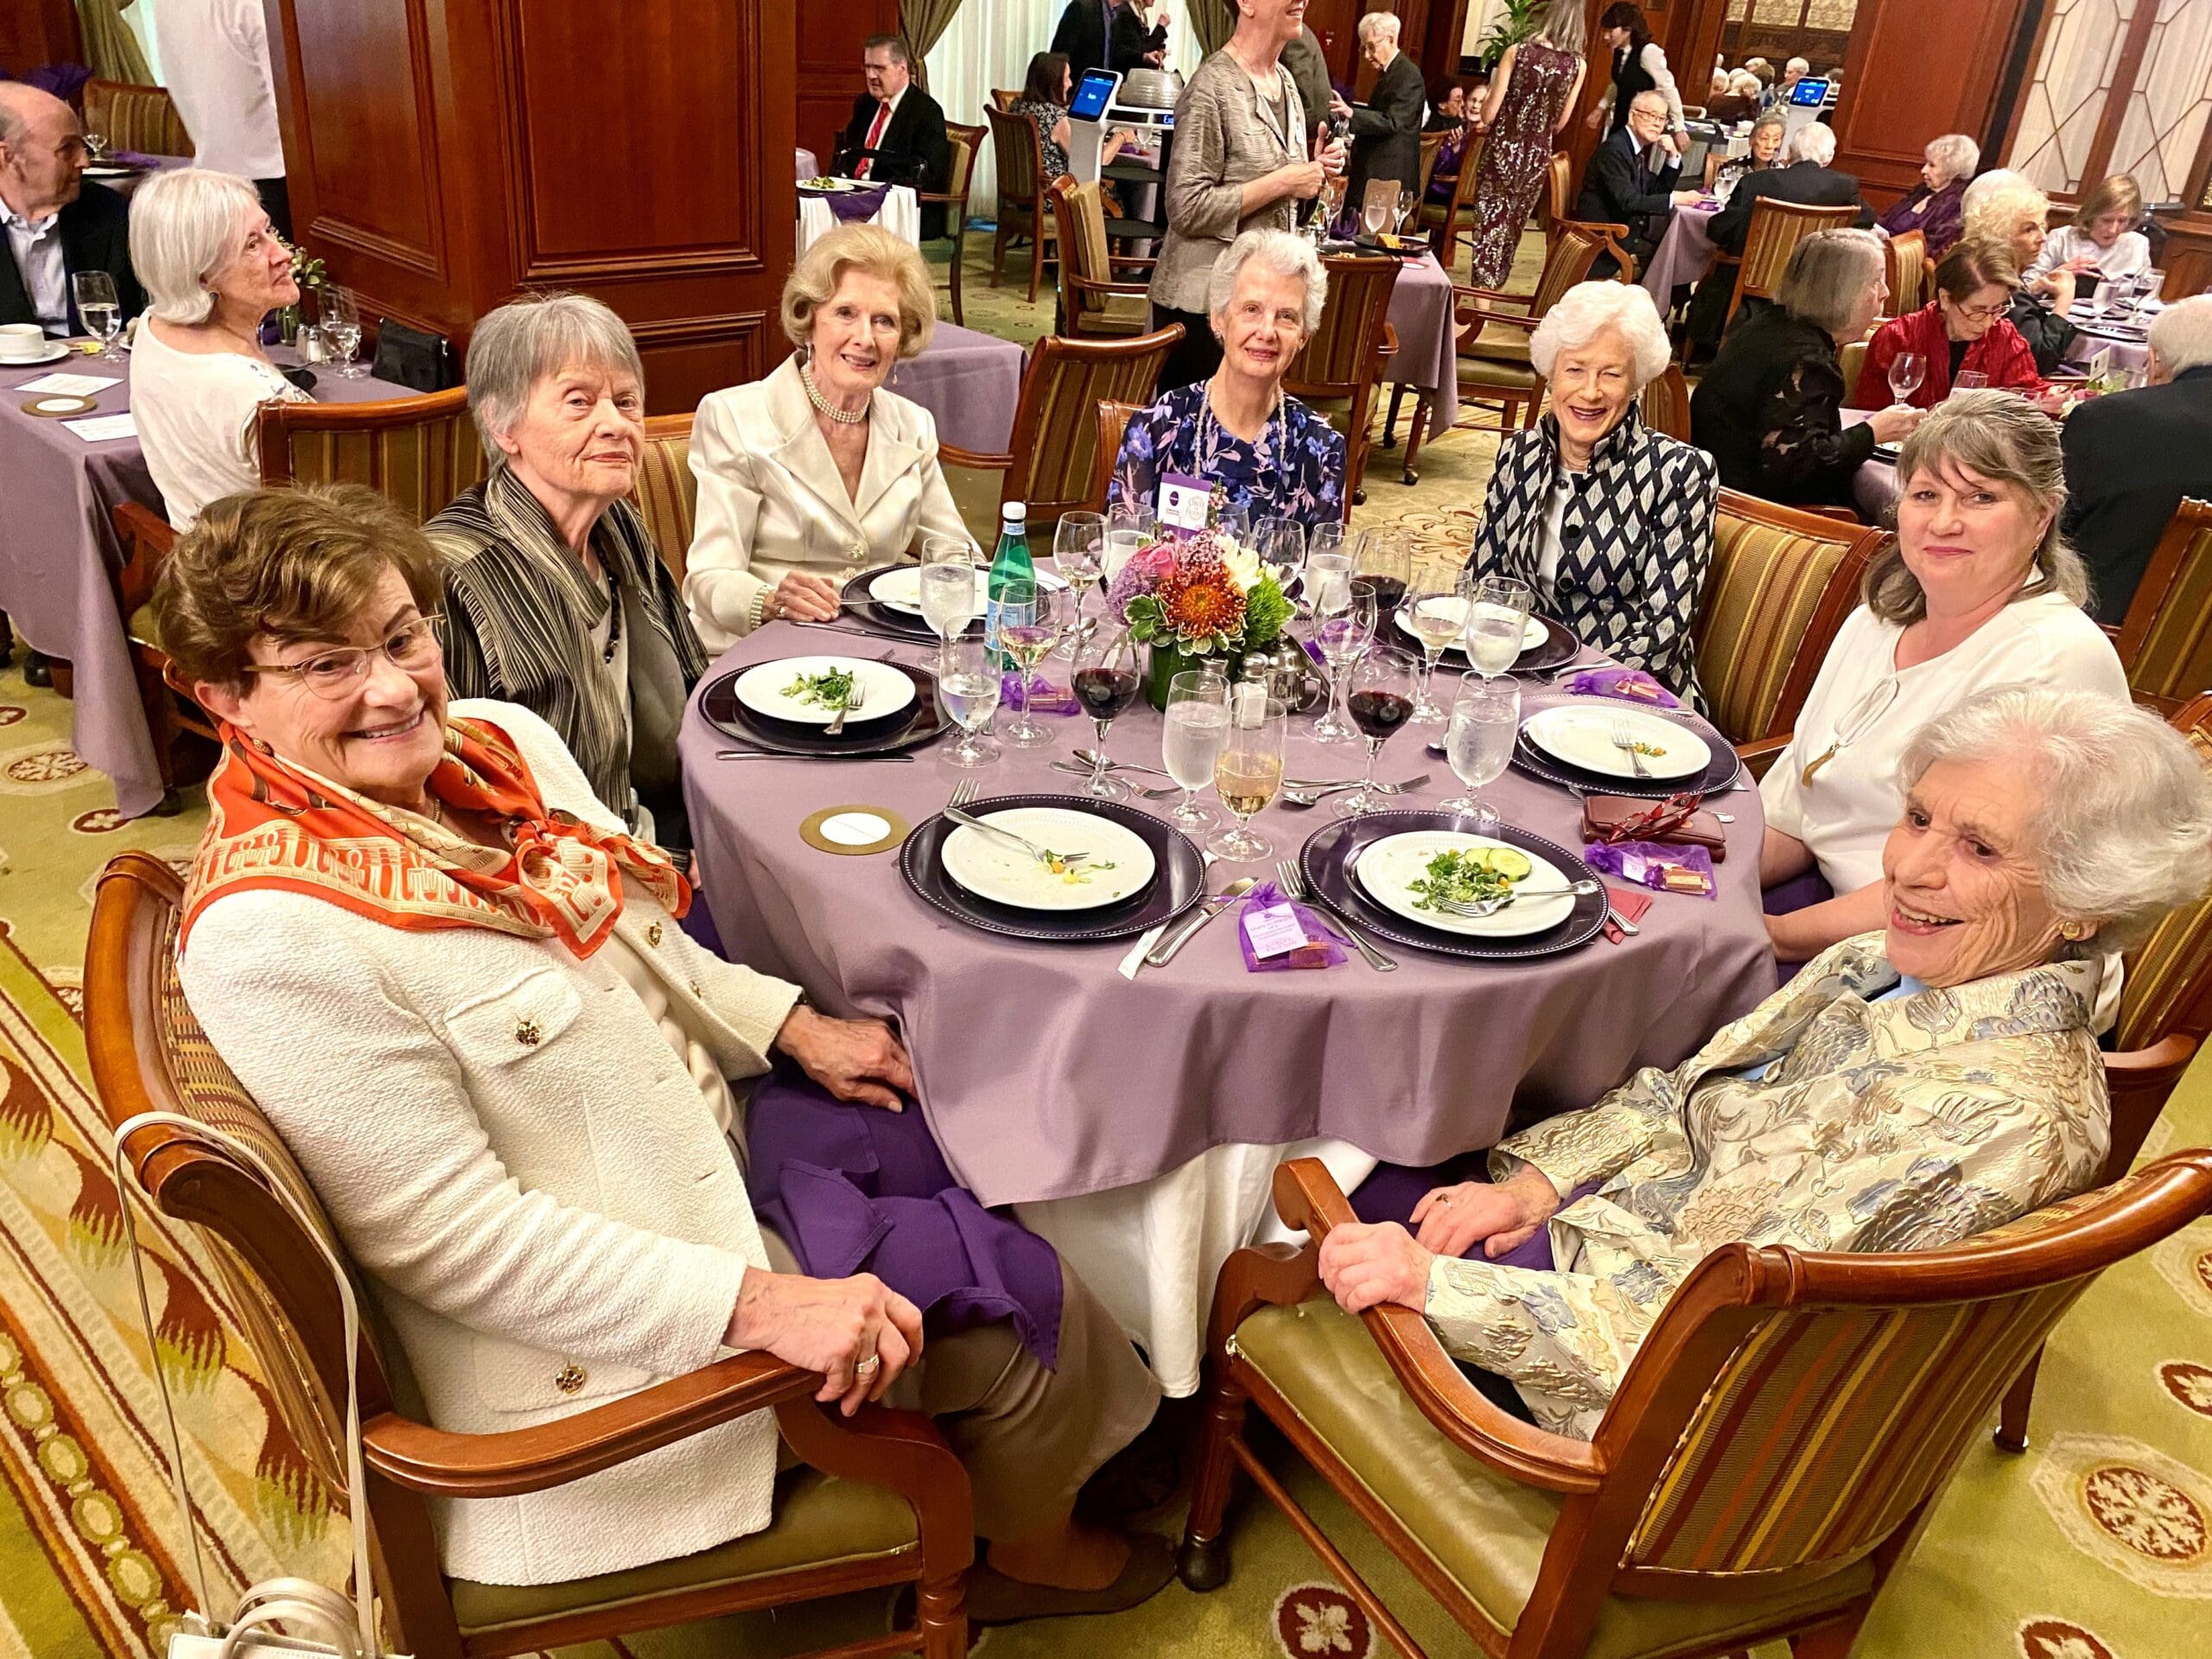 A group of women sit around a round dining table set with a lavender table cloth, plates, and glasses.